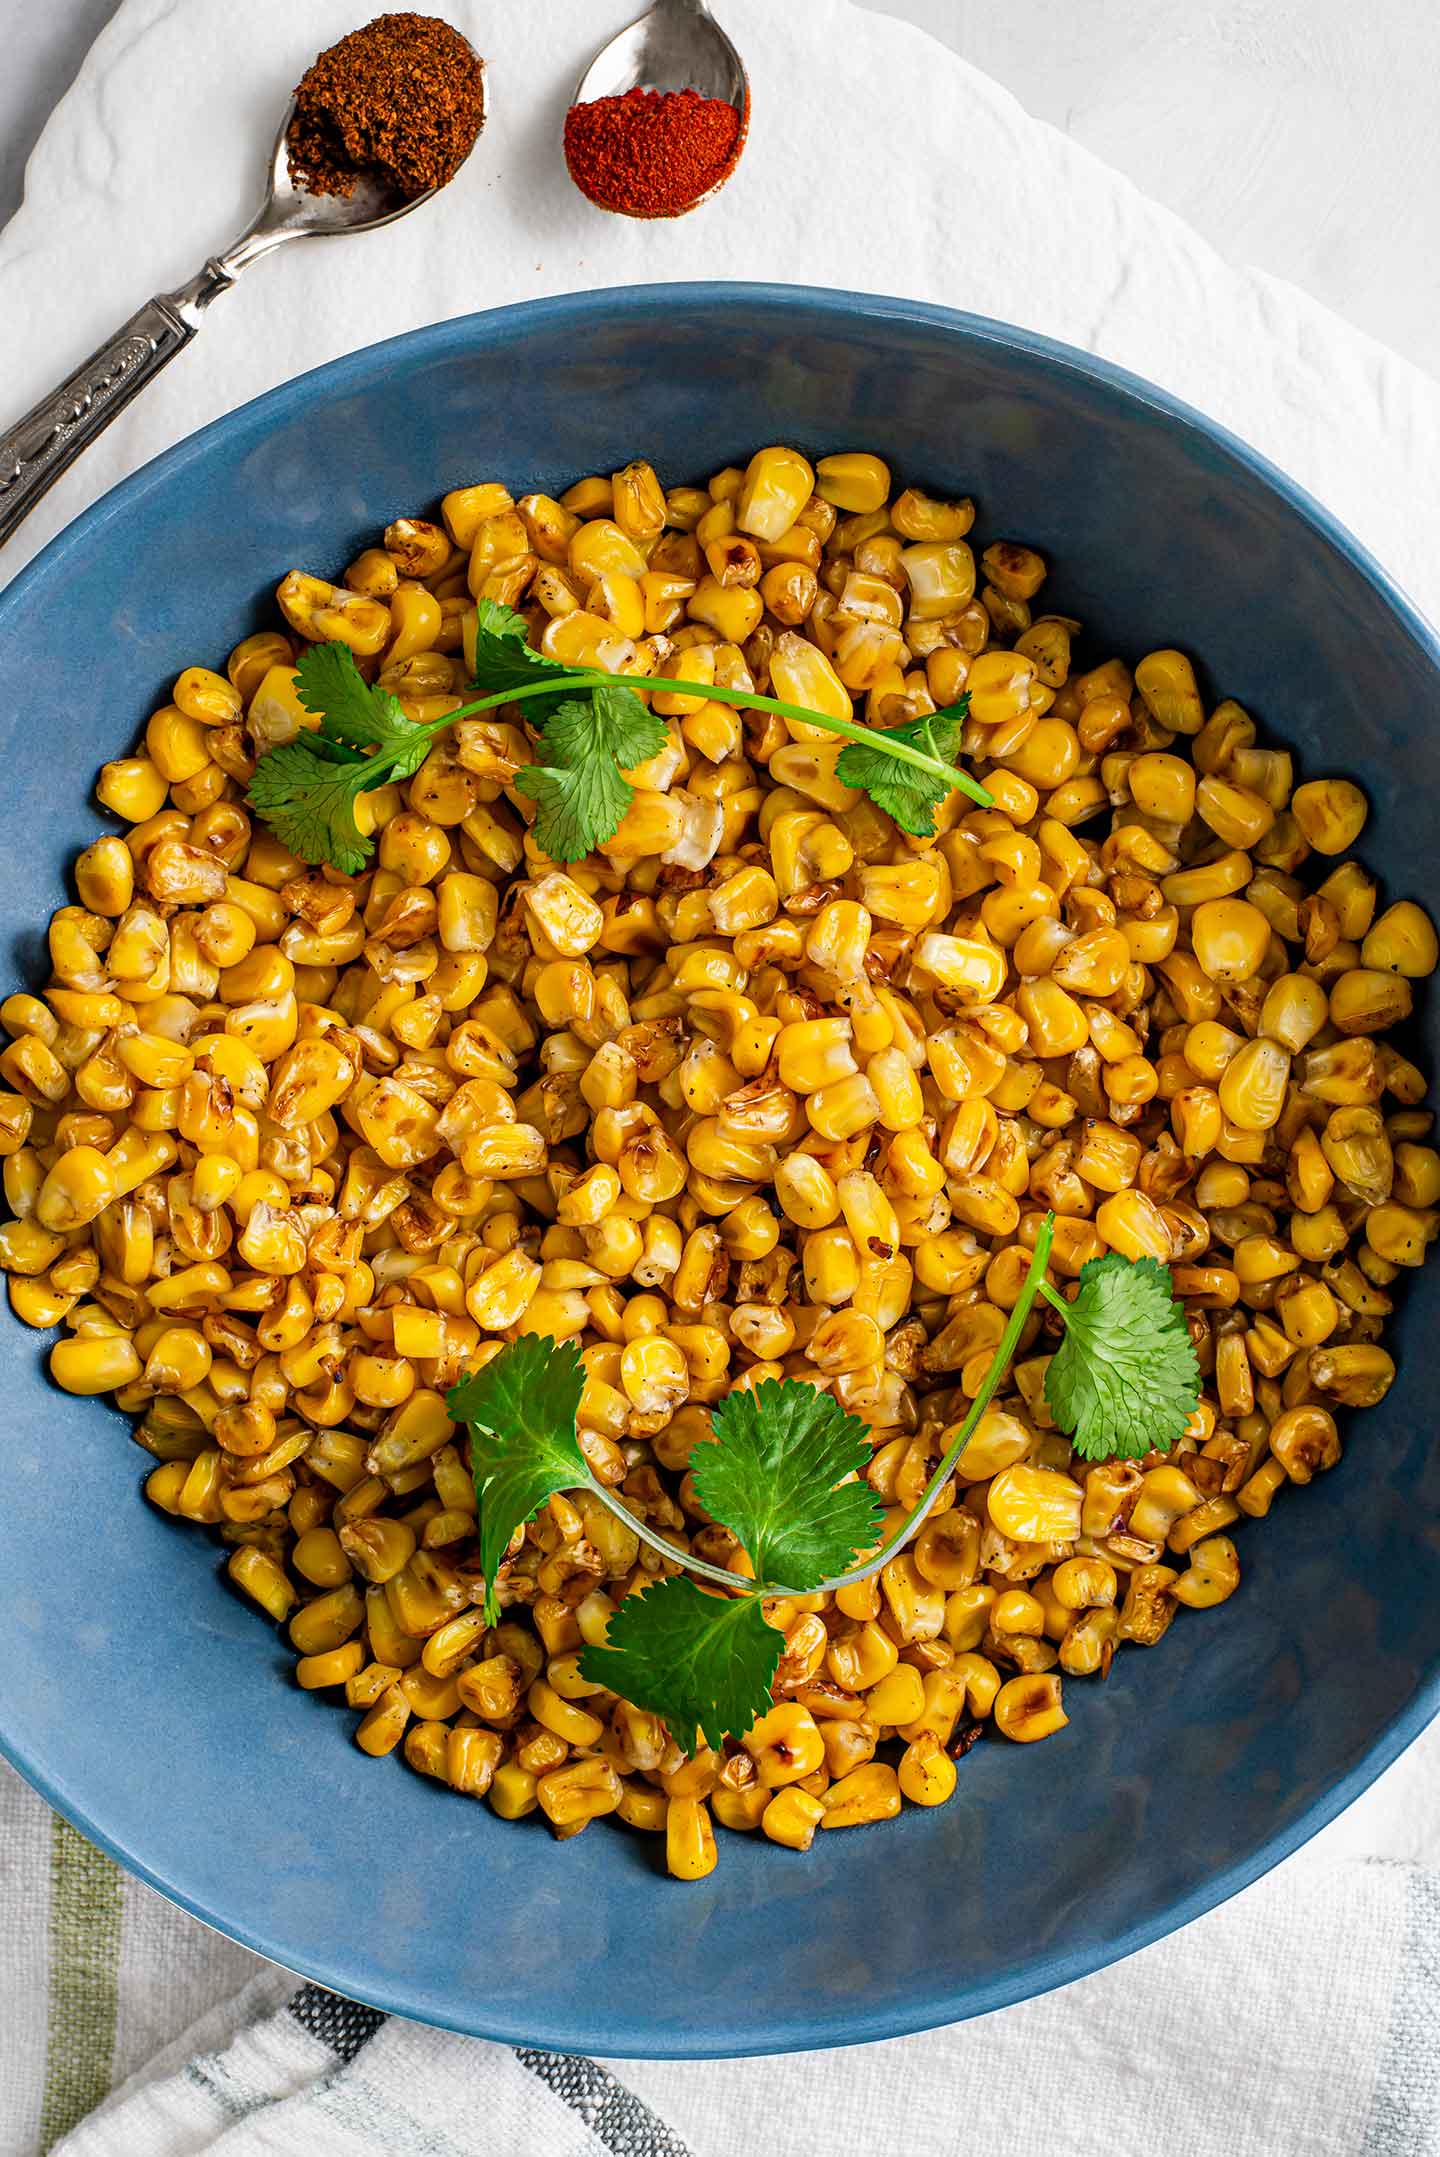 Top down view of skillet charred corn in a blue serving bowl. Sprigs of cilantro sit atop the deep yellow, browned corn kernels.